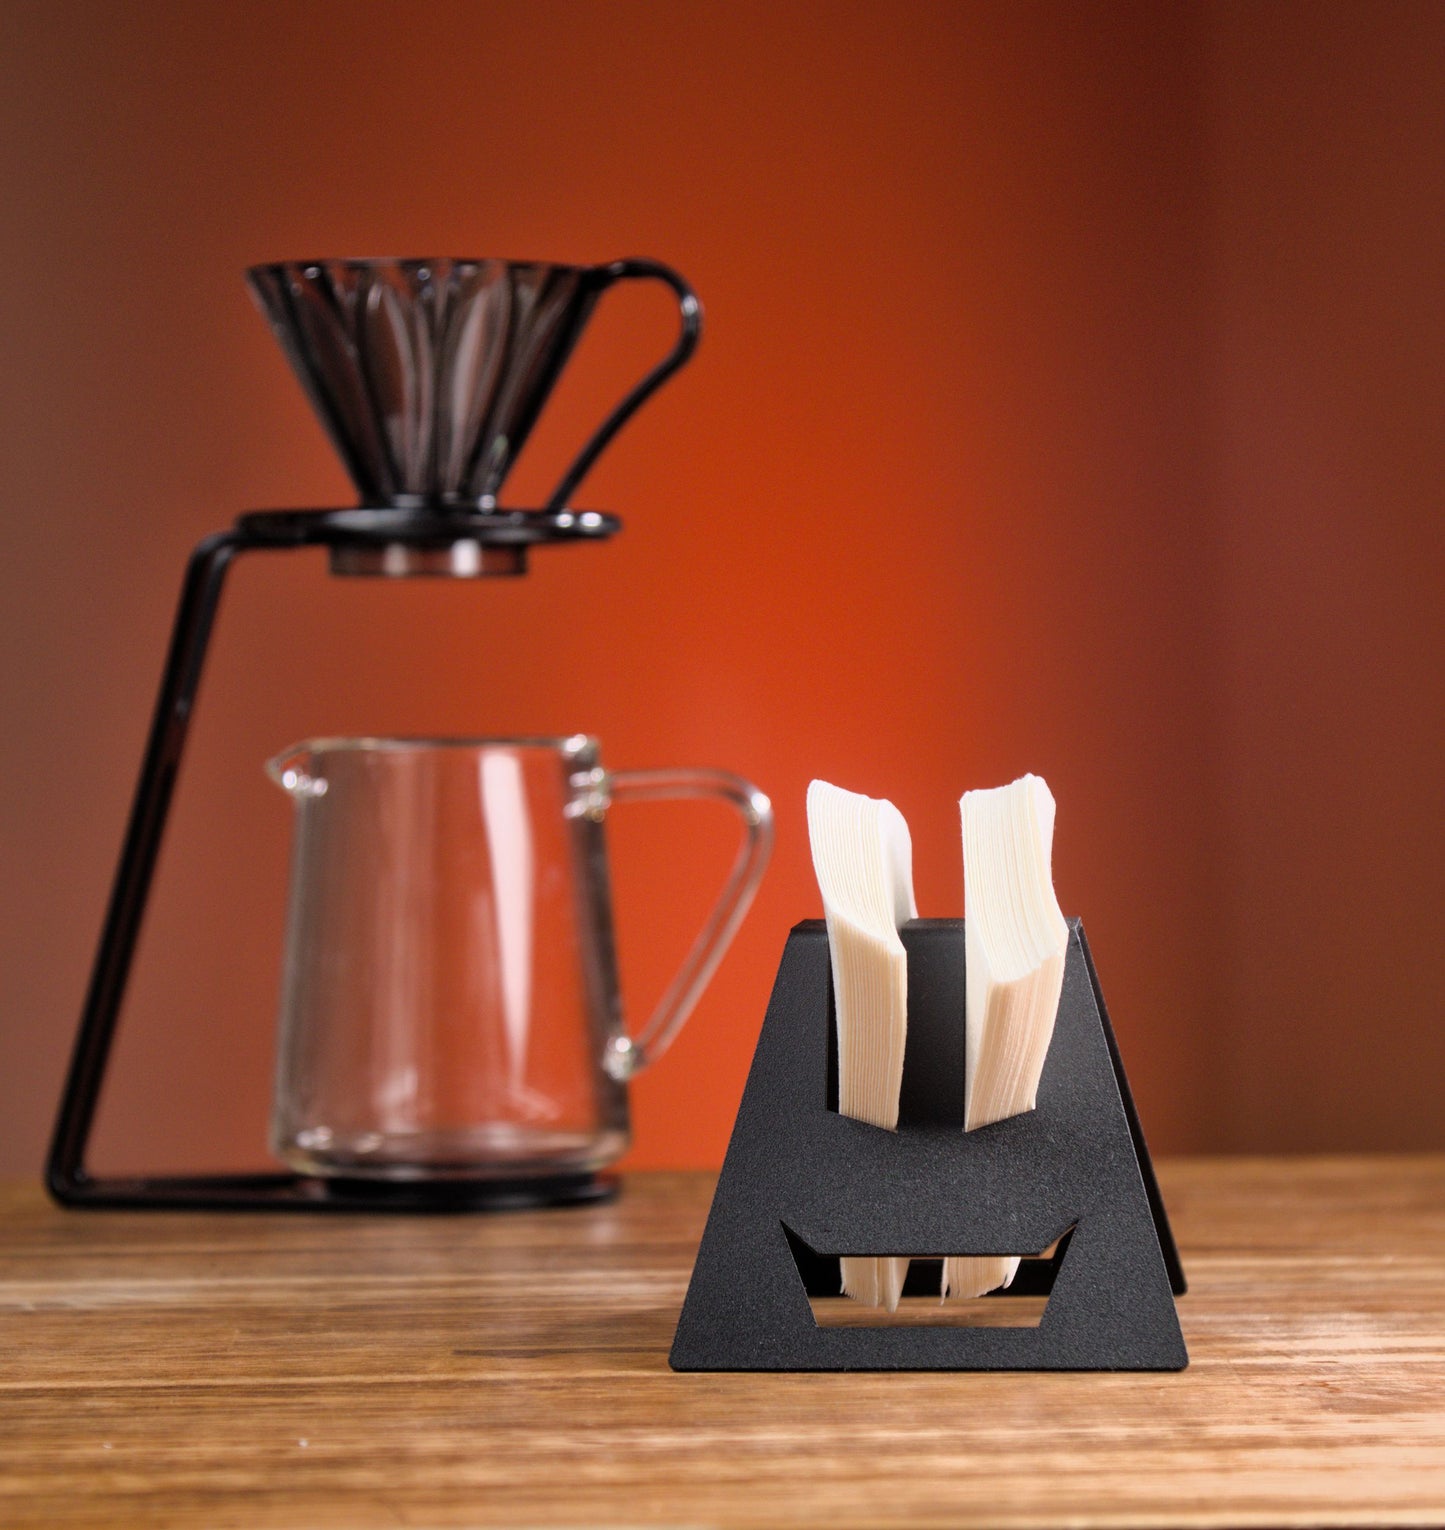 Ergonomic Metal Coffee Filter Holder "Creature" - For V60, Cone paper filters